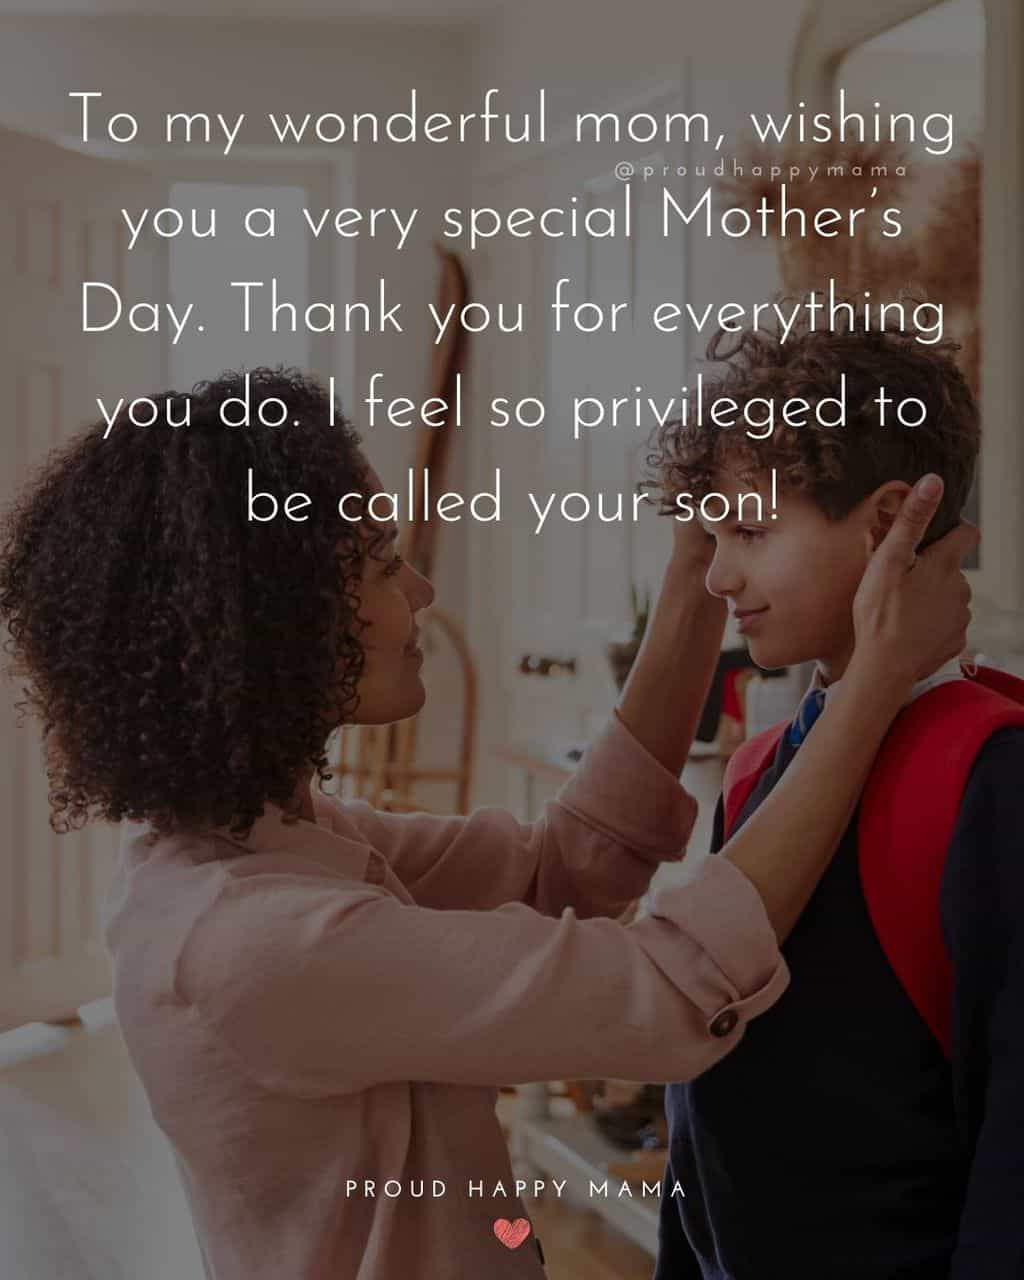 Happy Mothers Day Quotes From Son - To my wonderful mom, wishing you a very special Mother’s Day. Thank you for